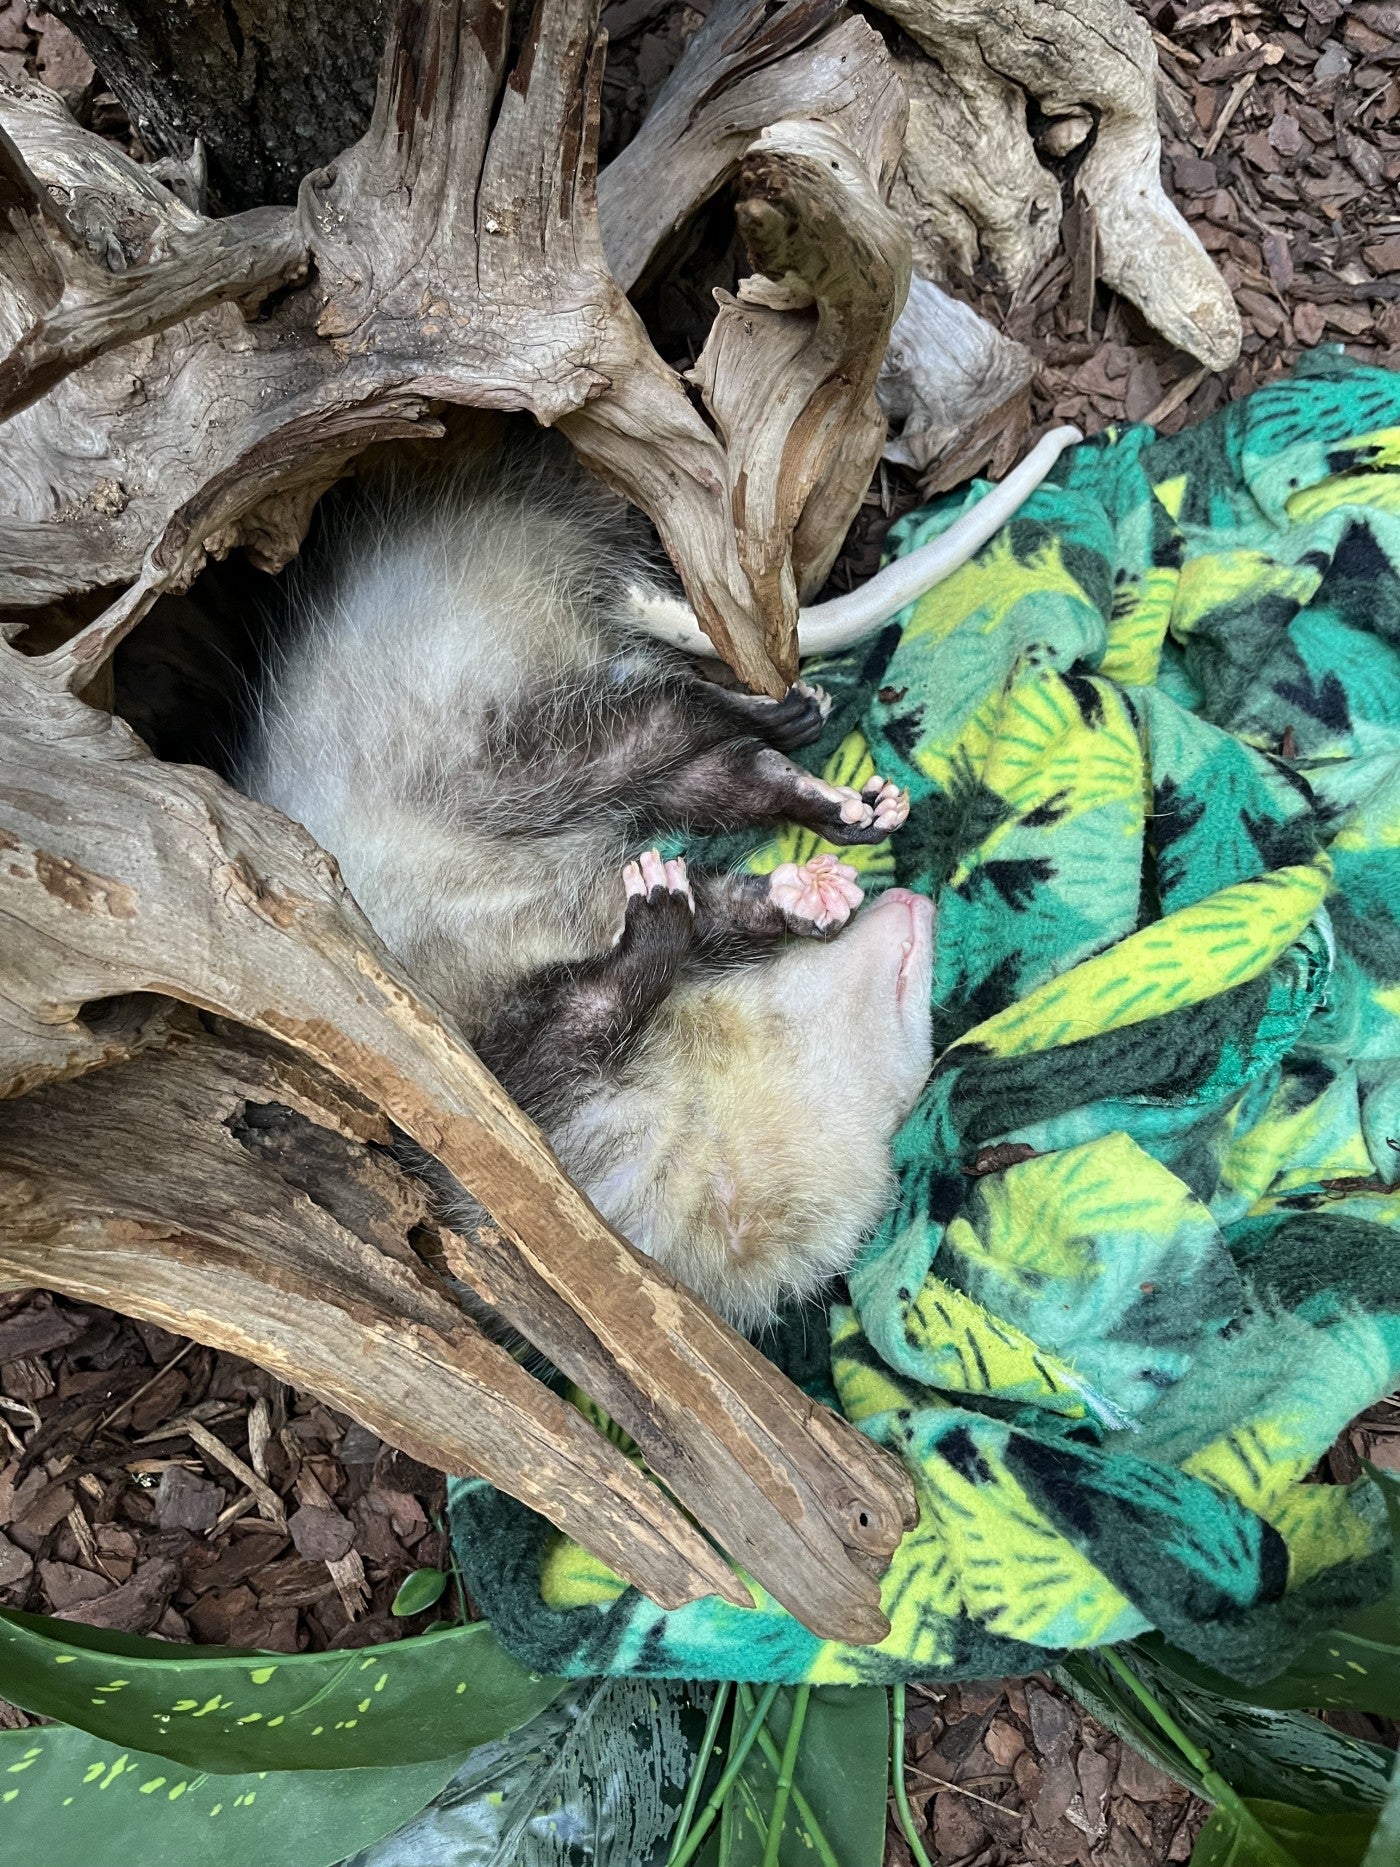 Top-down photo of Basil the opossum in his exhibit. He is sleeping sprawled on his side, resting on a fleece blanket.